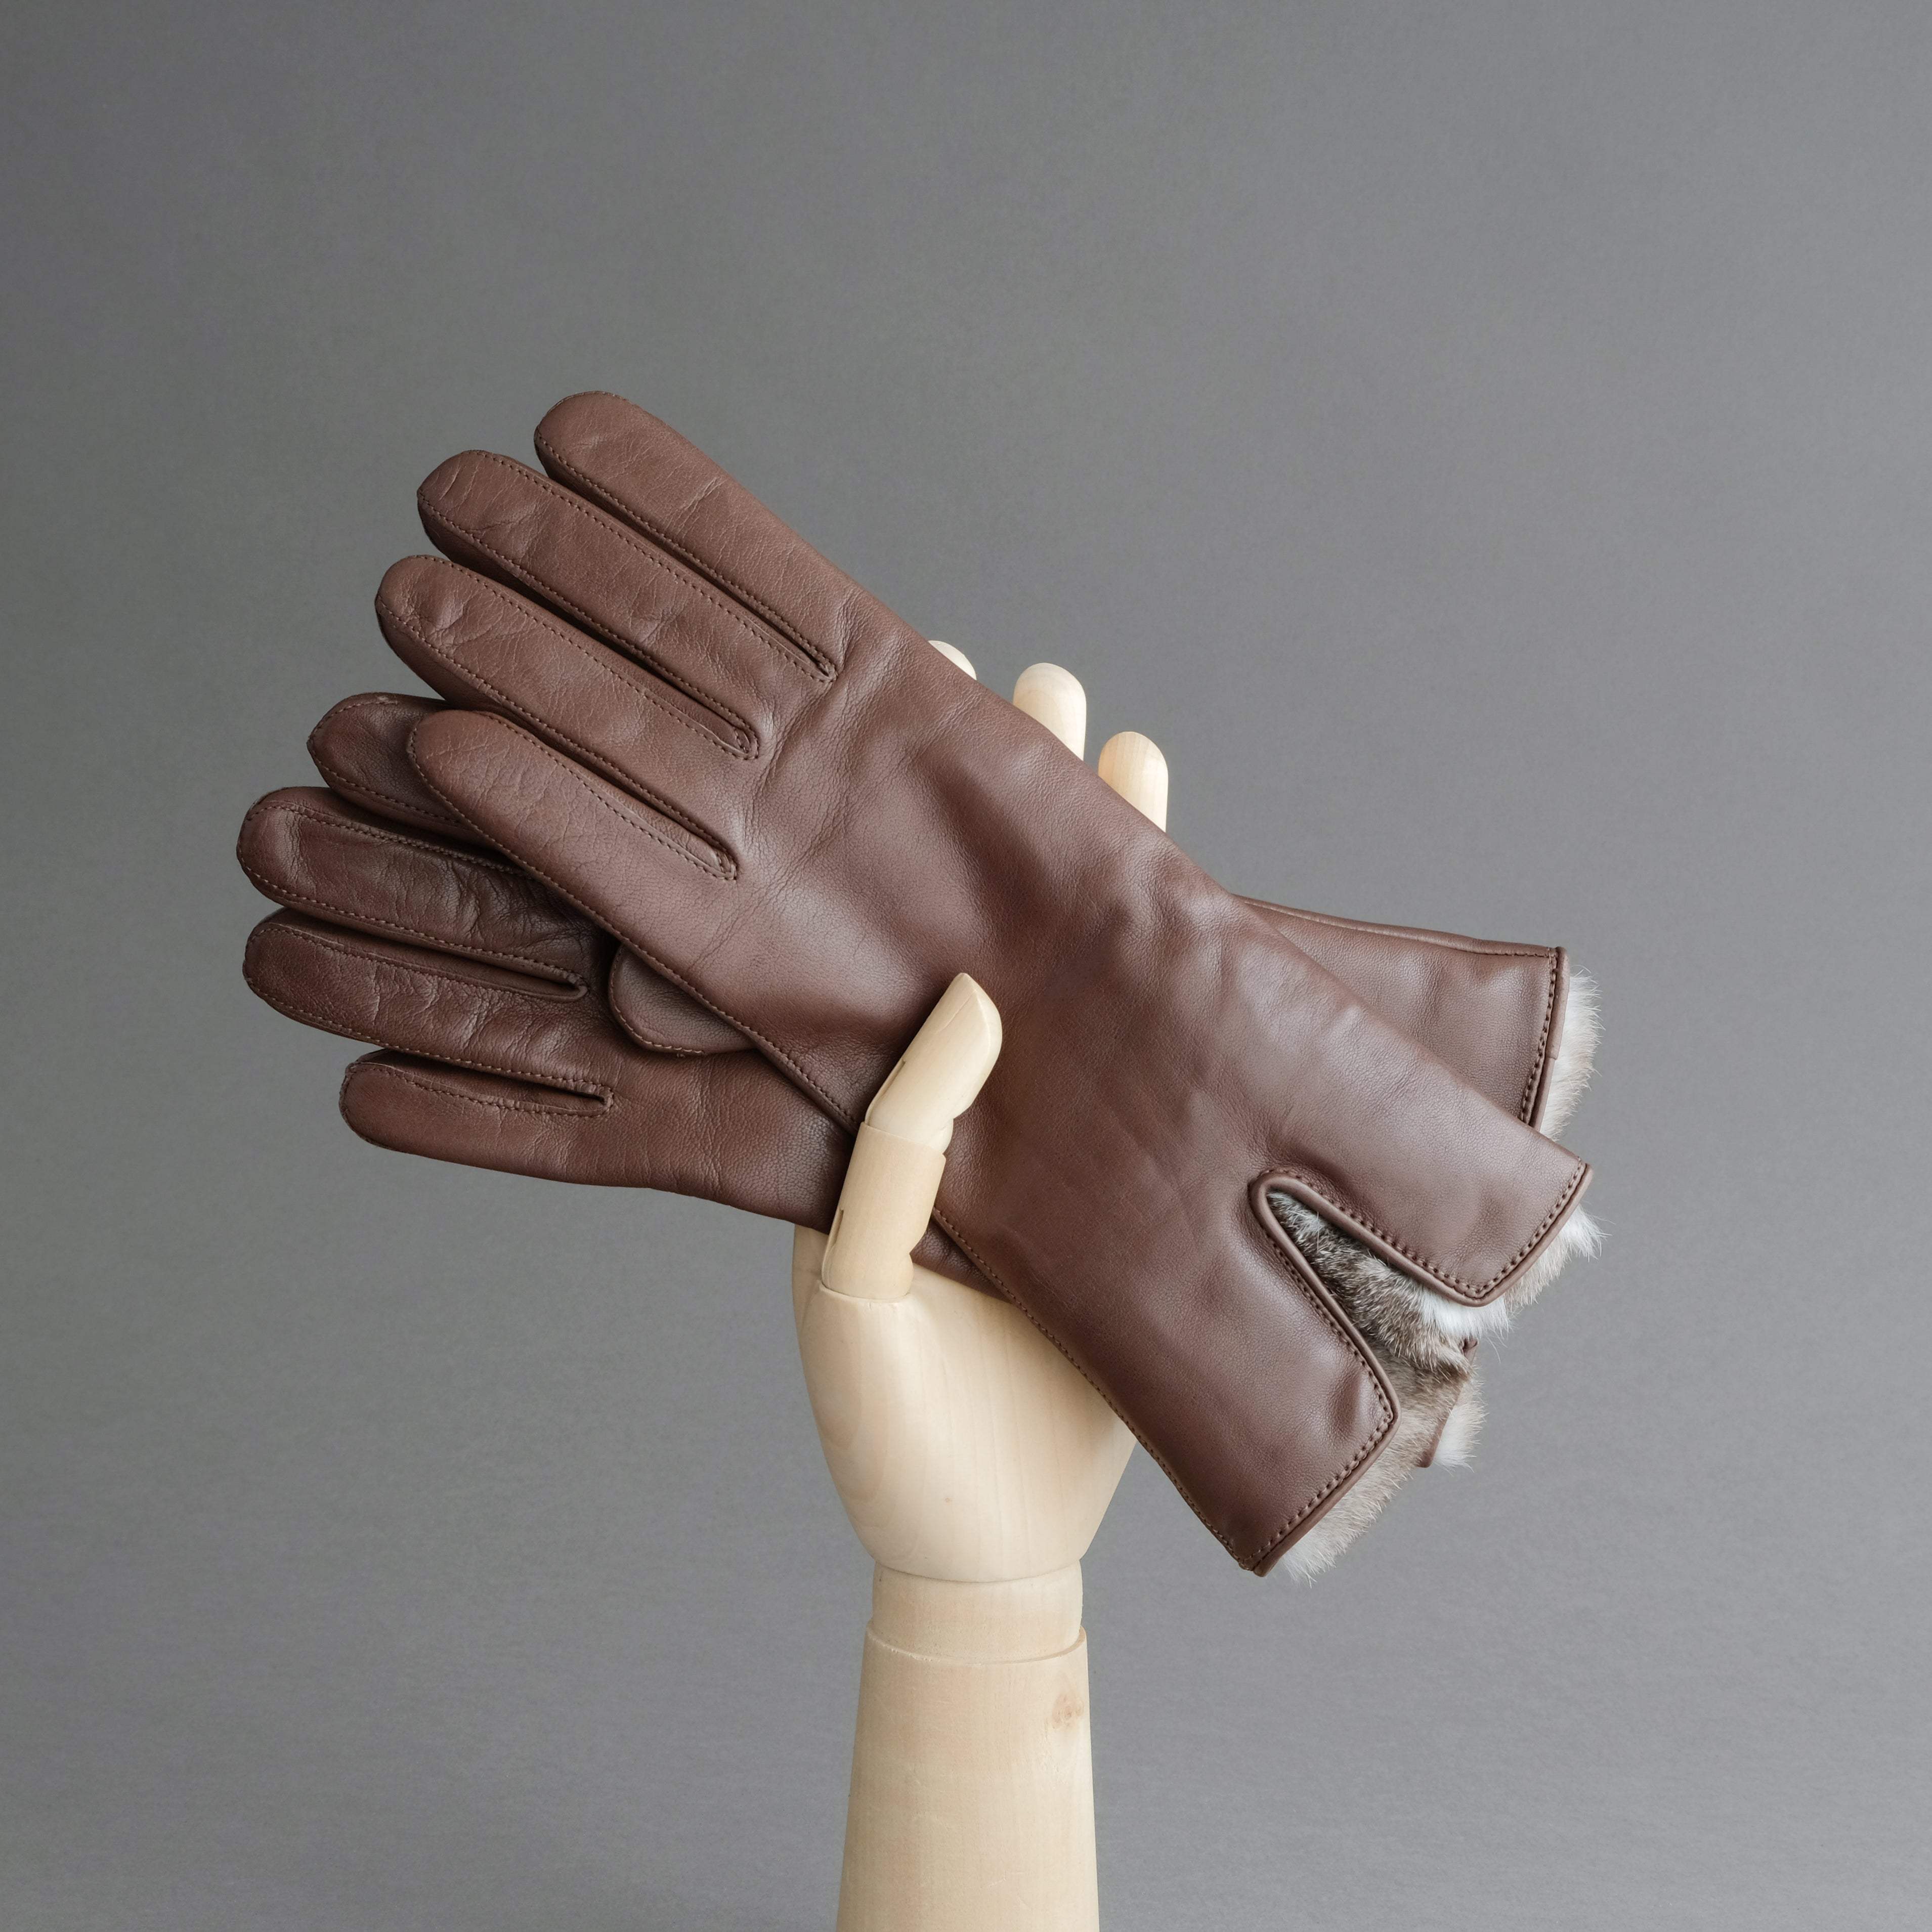 Ladies Gloves from Hair Sheep Nappa lined with Cashmere and Orylag - TR Handschuhe Wien - Thomas Riemer Handmade Gloves